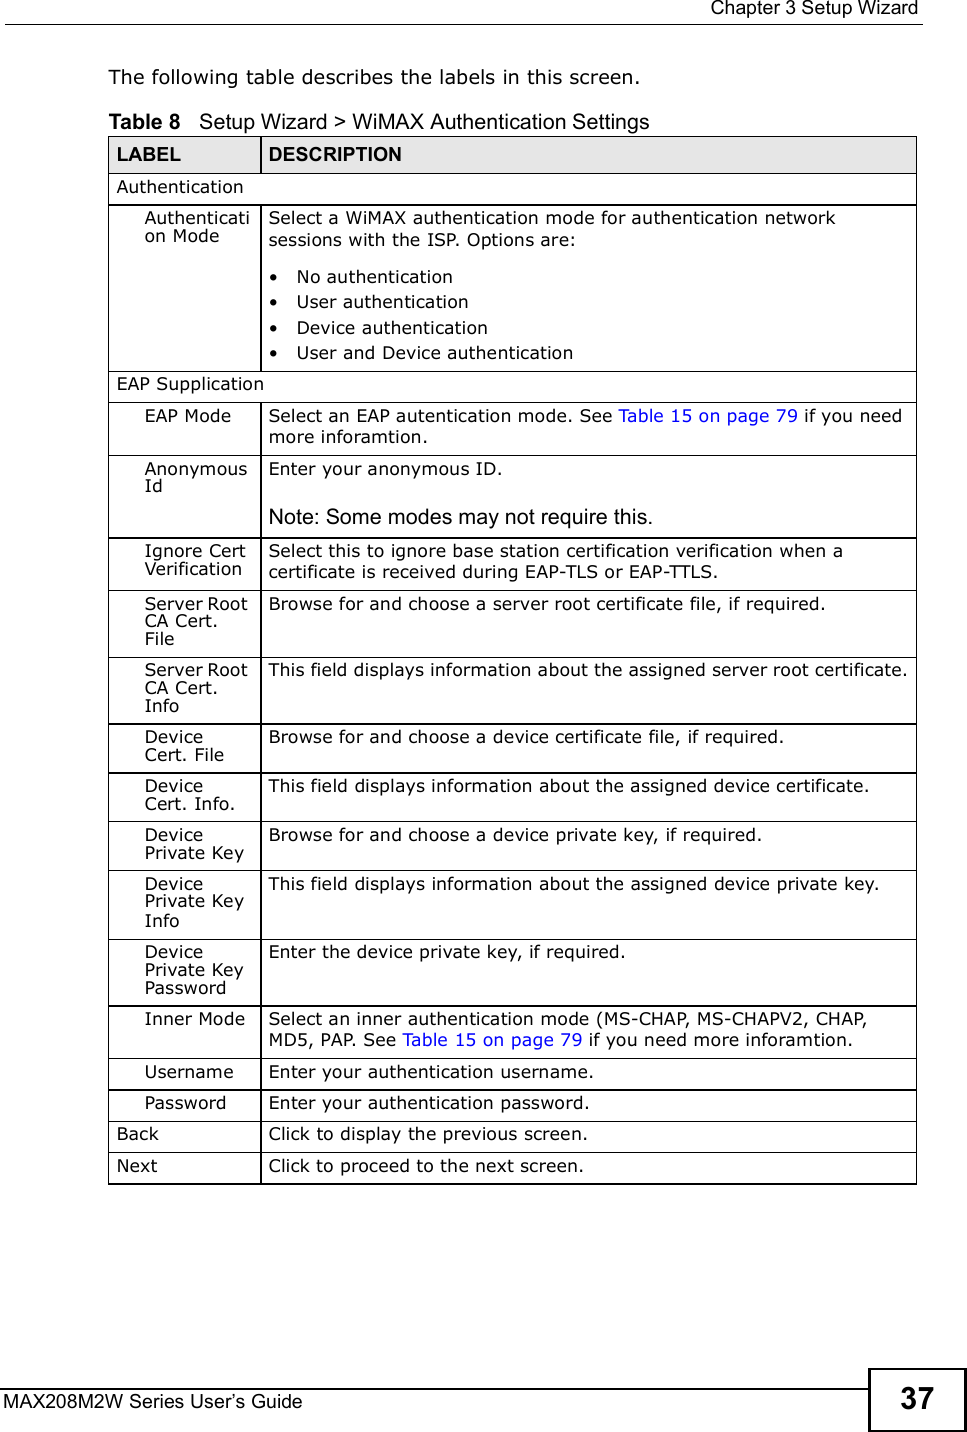  Chapter 3Setup WizardMAX208M2W Series User s Guide 37The following table describes the labels in this screen.Table 8   Setup Wizard &gt; WiMAX Authentication SettingsLABEL DESCRIPTIONAuthenticationAuthentication ModeSelect a WiMAX authentication mode for authentication network sessions with the ISP. Options are:!No authentication!User authentication!Device authentication!User and Device authenticationEAP SupplicationEAP Mode Select an EAP autentication mode. See Table 15 on page 79 if you need more inforamtion.Anonymous IdEnter your anonymous ID. Note: Some modes may not require this.Ignore Cert VerificationSelect this to ignore base station certification verification when a certificate is received during EAP-TLS or EAP-TTLS.Server Root CA Cert. FileBrowse for and choose a server root certificate file, if required.Server Root CA Cert. InfoThis field displays information about the assigned server root certificate.Device Cert. FileBrowse for and choose a device certificate file, if required.Device Cert. Info.This field displays information about the assigned device certificate.Device Private KeyBrowse for and choose a device private key, if required.Device Private KeyInfoThis field displays information about the assigned device private key.Device Private Key PasswordEnter the device private key, if required.Inner Mode Select an inner authentication mode (MS-CHAP, MS-CHAPV2, CHAP, MD5, PAP. See Table 15 on page 79 if you need more inforamtion.Username Enter your authentication username.Password Enter your authentication password.Back Click to display the previous screen.Next Click to proceed to the next screen. 